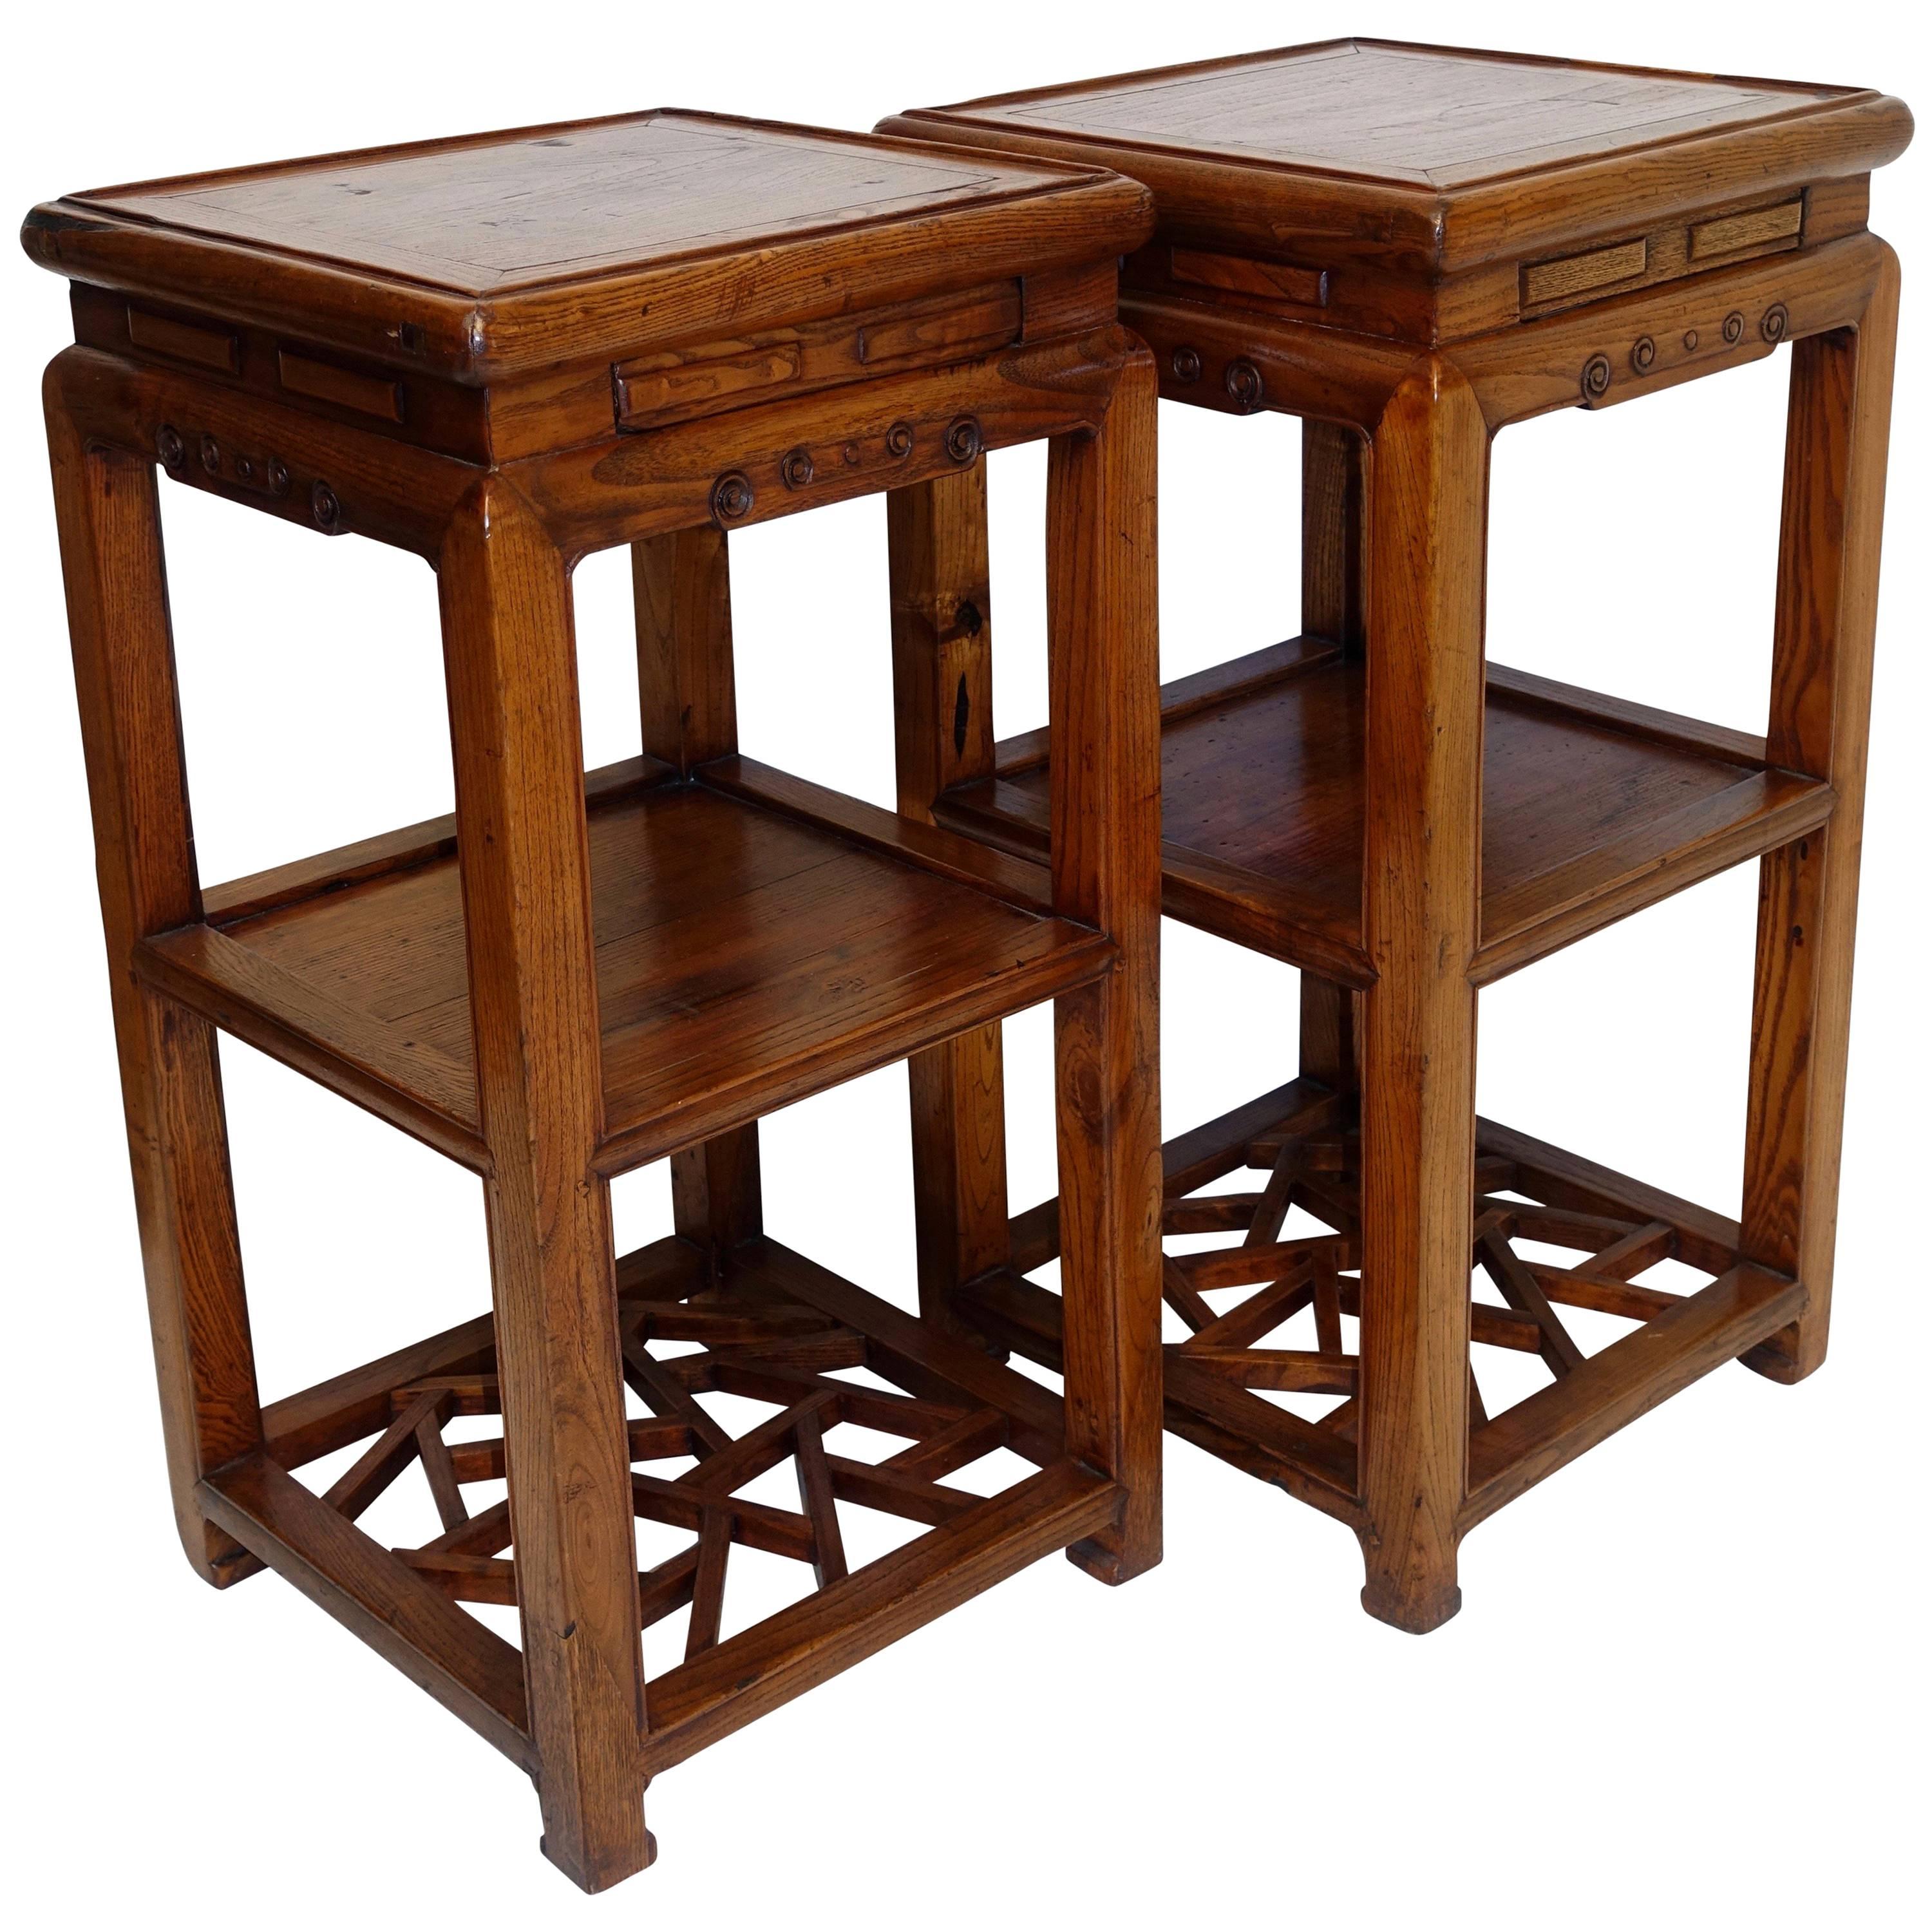 Pair of Qing Dynasty Two-Tier Stands with Hidden Drawers